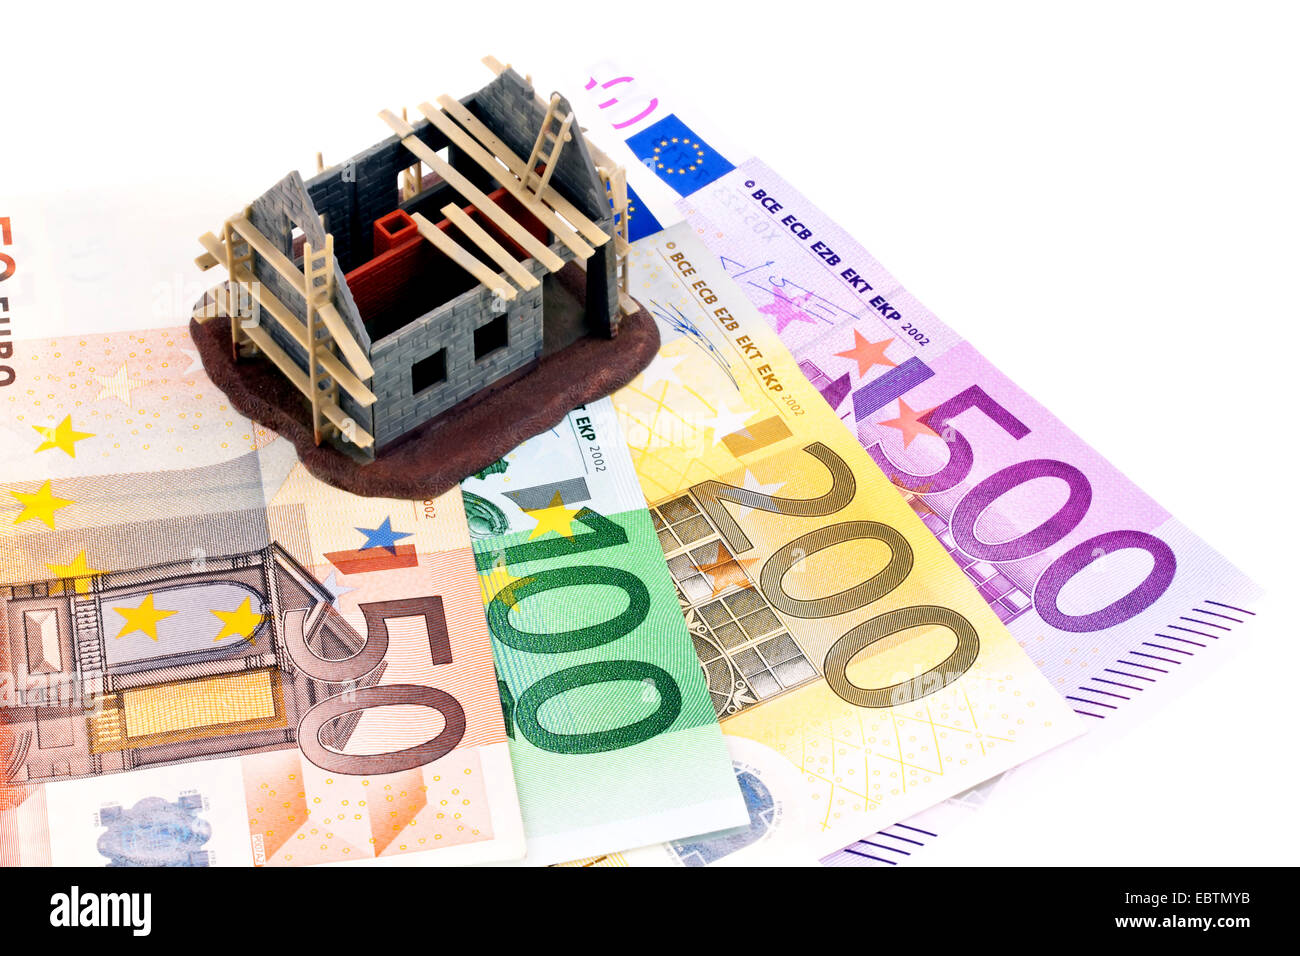 Euro notes and shell of a house Stock Photo